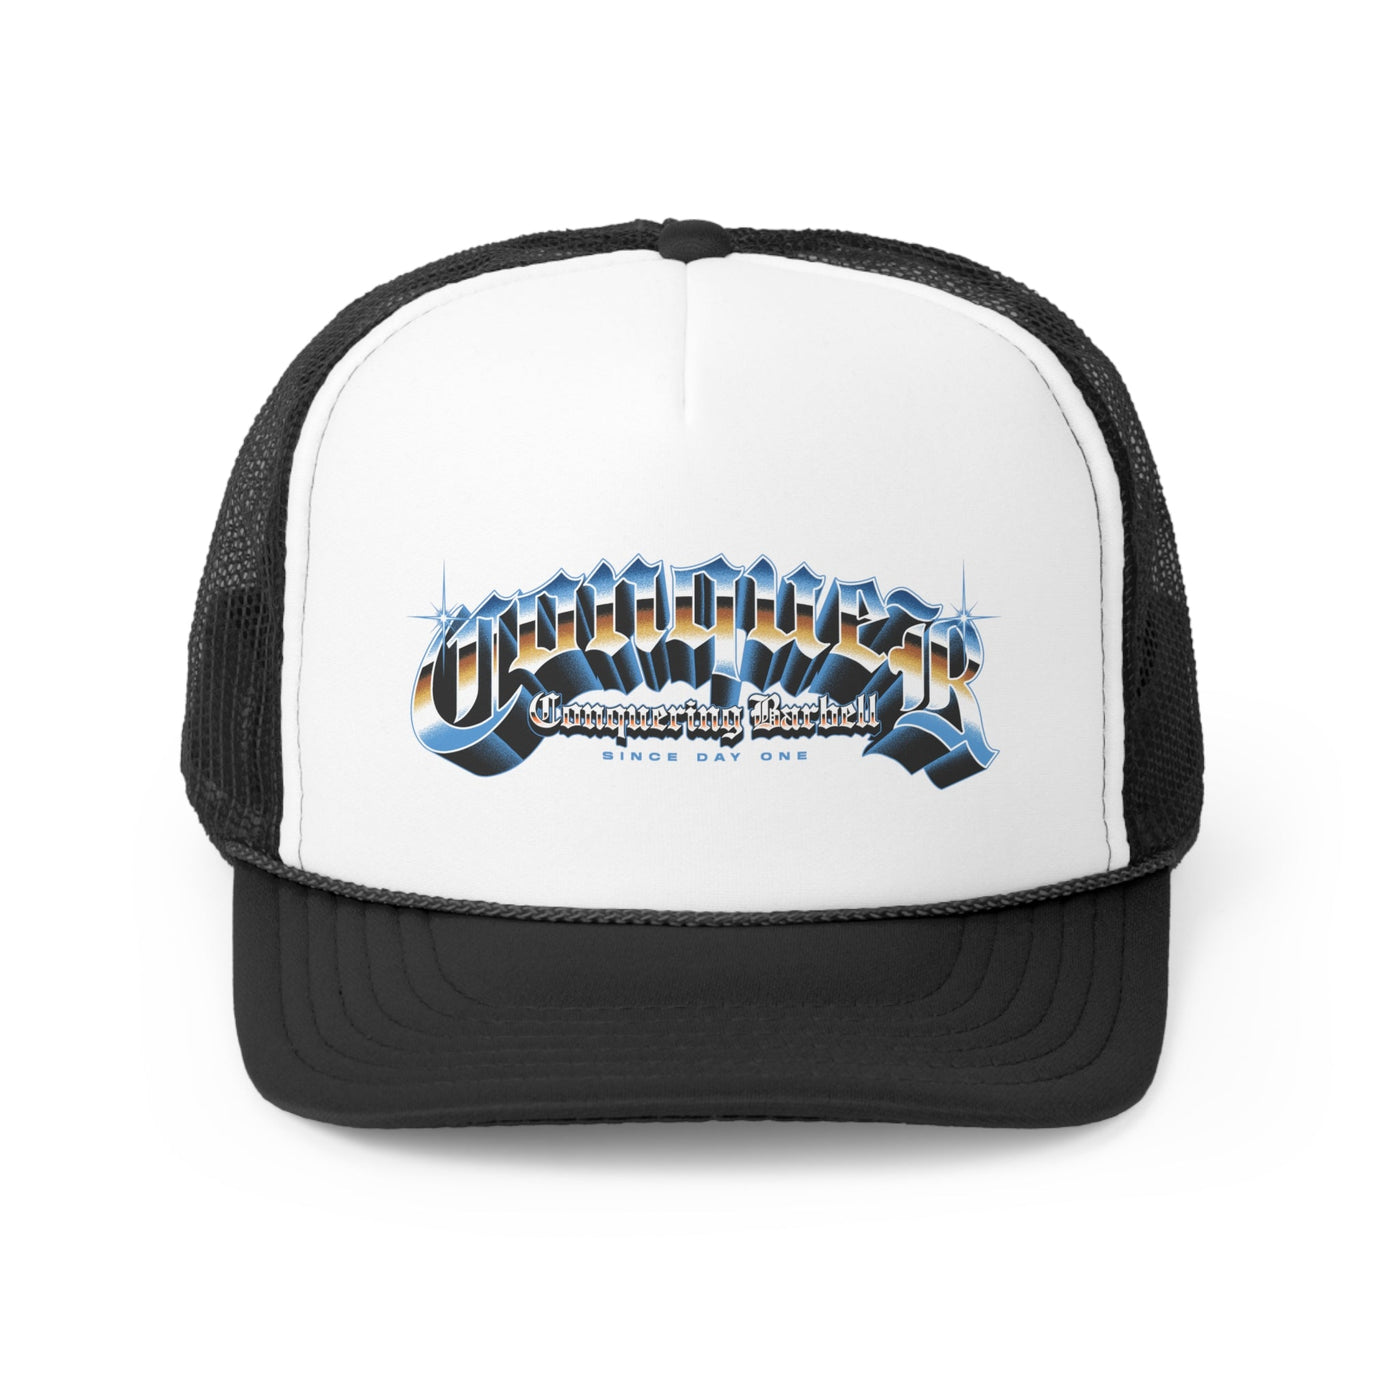 Conquer - Street Cred - Black/White Trucker Cap - Conquering Barbell